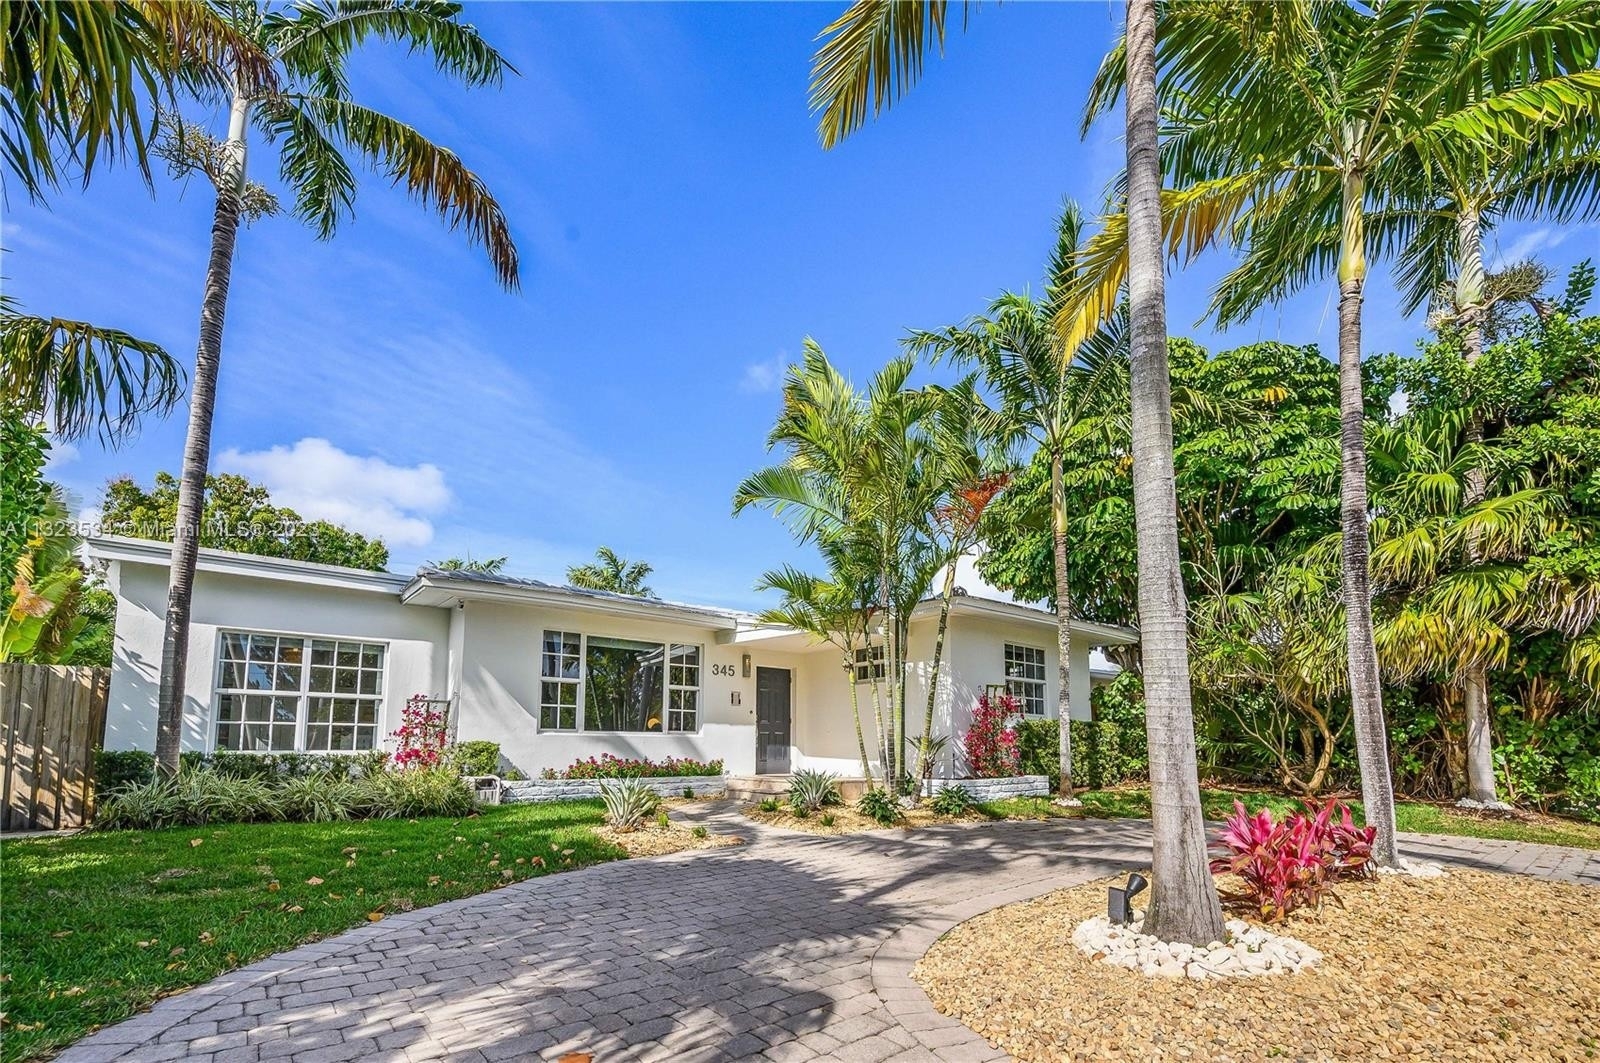 Single Family Home for Sale at Normandy Shores, Miami Beach, FL 33141